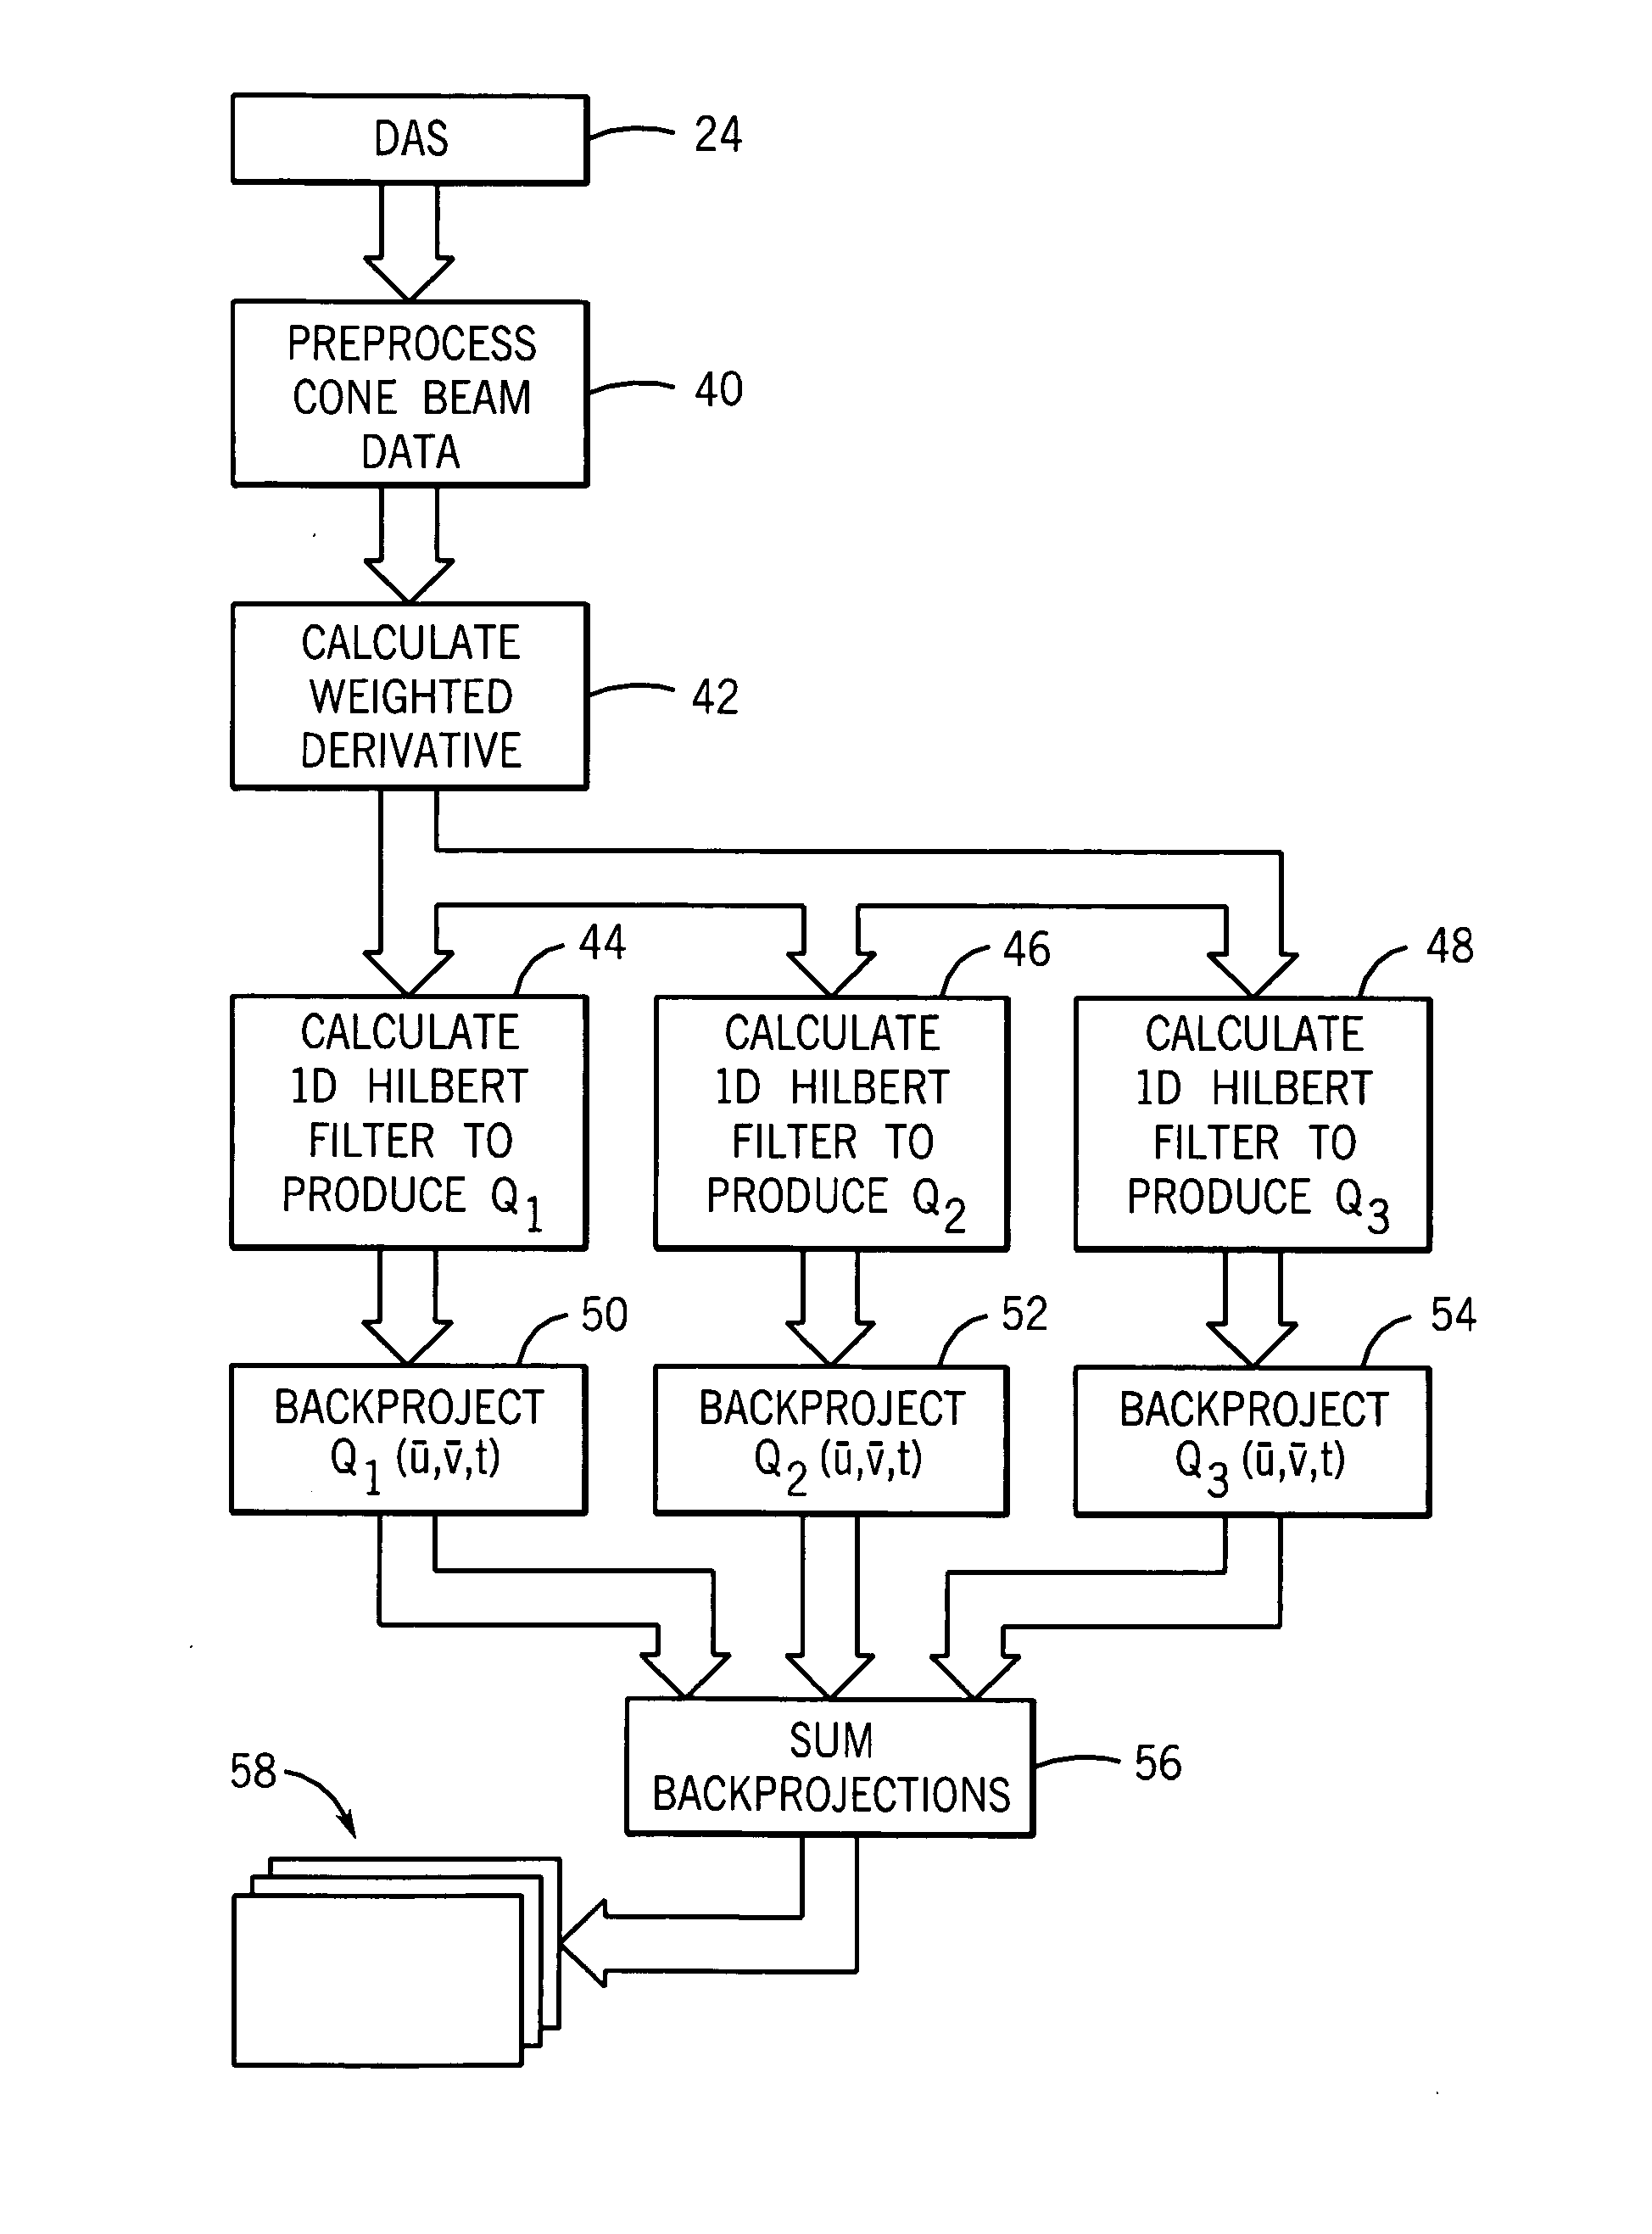 Cone-beam filtered backprojection image reconstruction method for short trajectories